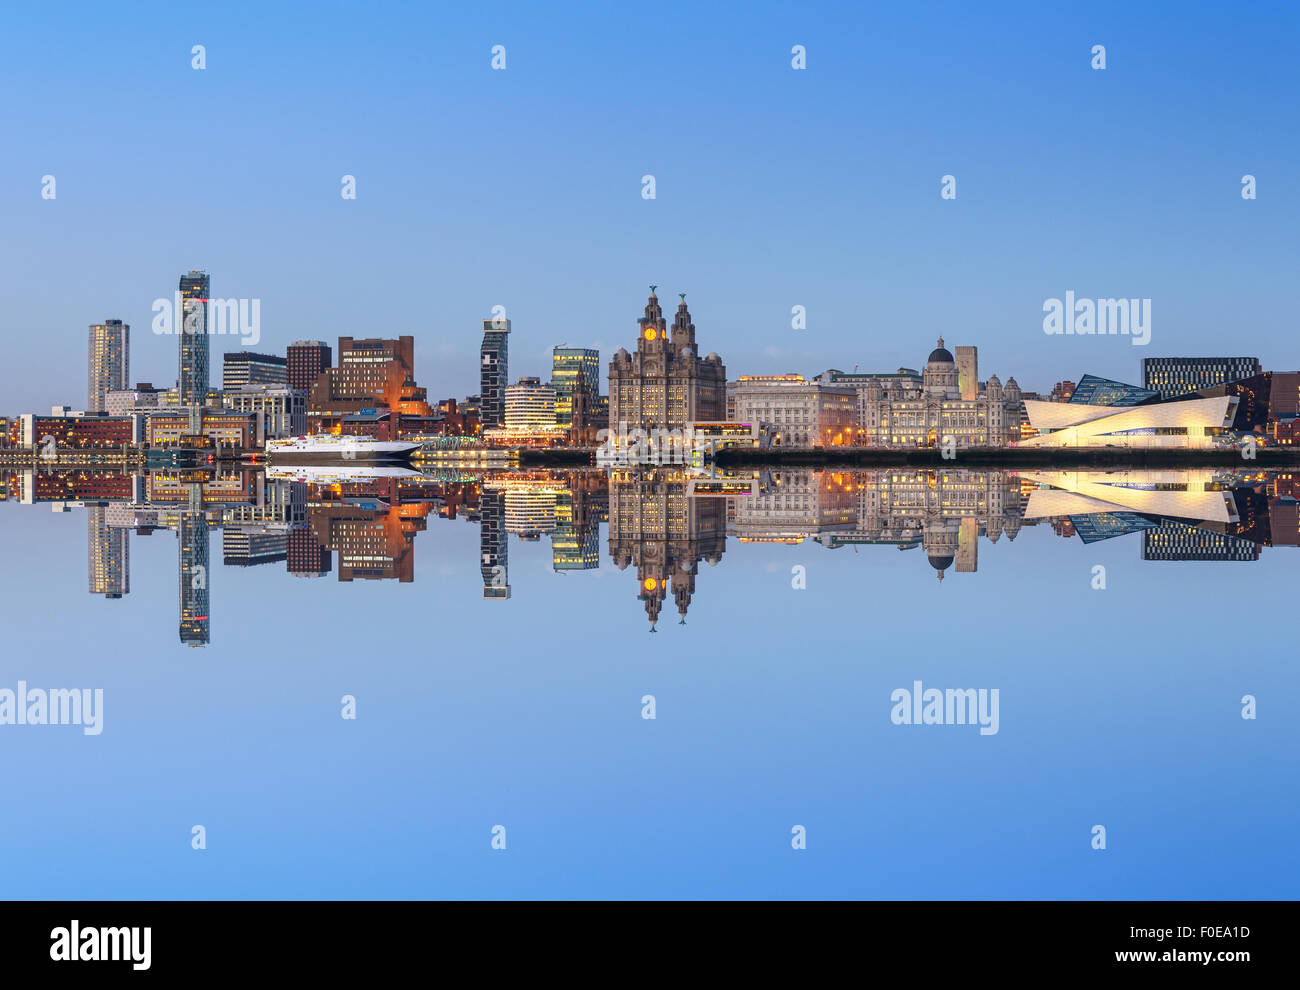 A perfect reflection of Liverpool city skyline. All the famous landmarks of Liverpool on the horizon. Stock Photo